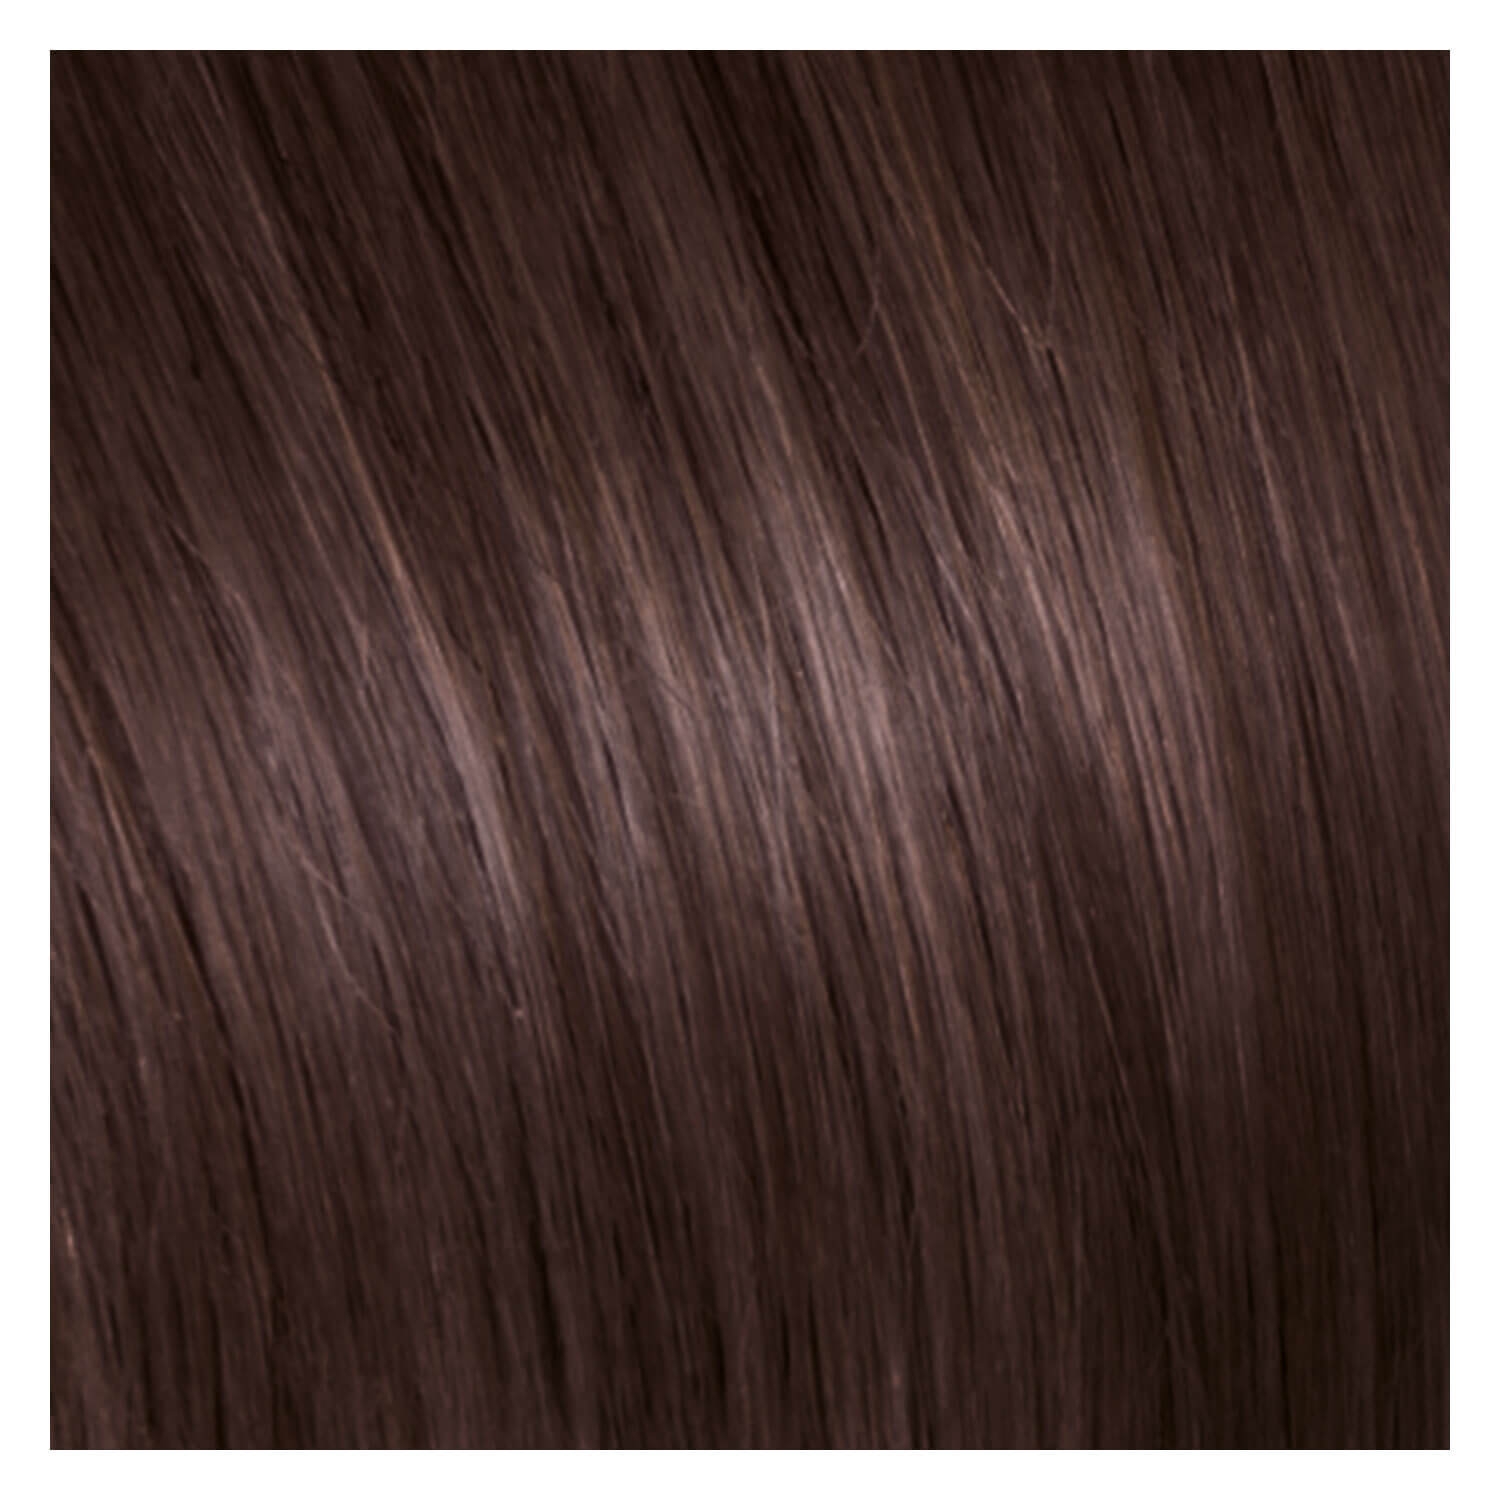 Product image from SHE Clip In-System Hair Extensions - 9-teiliges Set 6 Helles Kastanienbraun 50/55cm